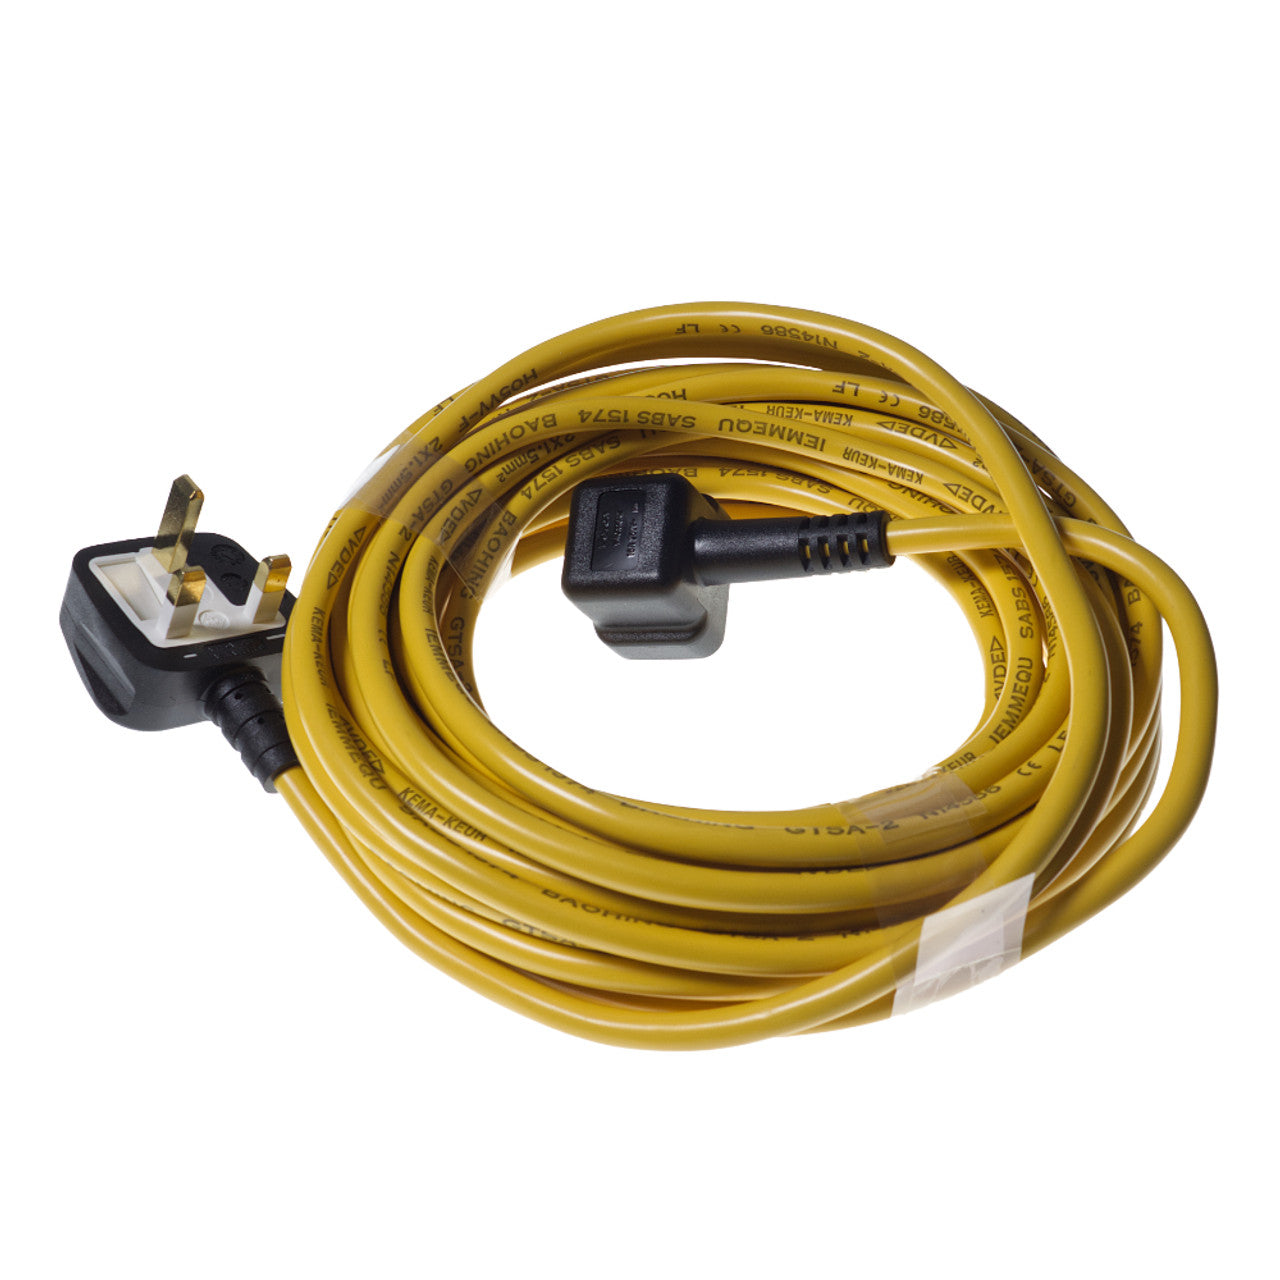 Mains Cable 20 metre 911819 for Numatic and other models.